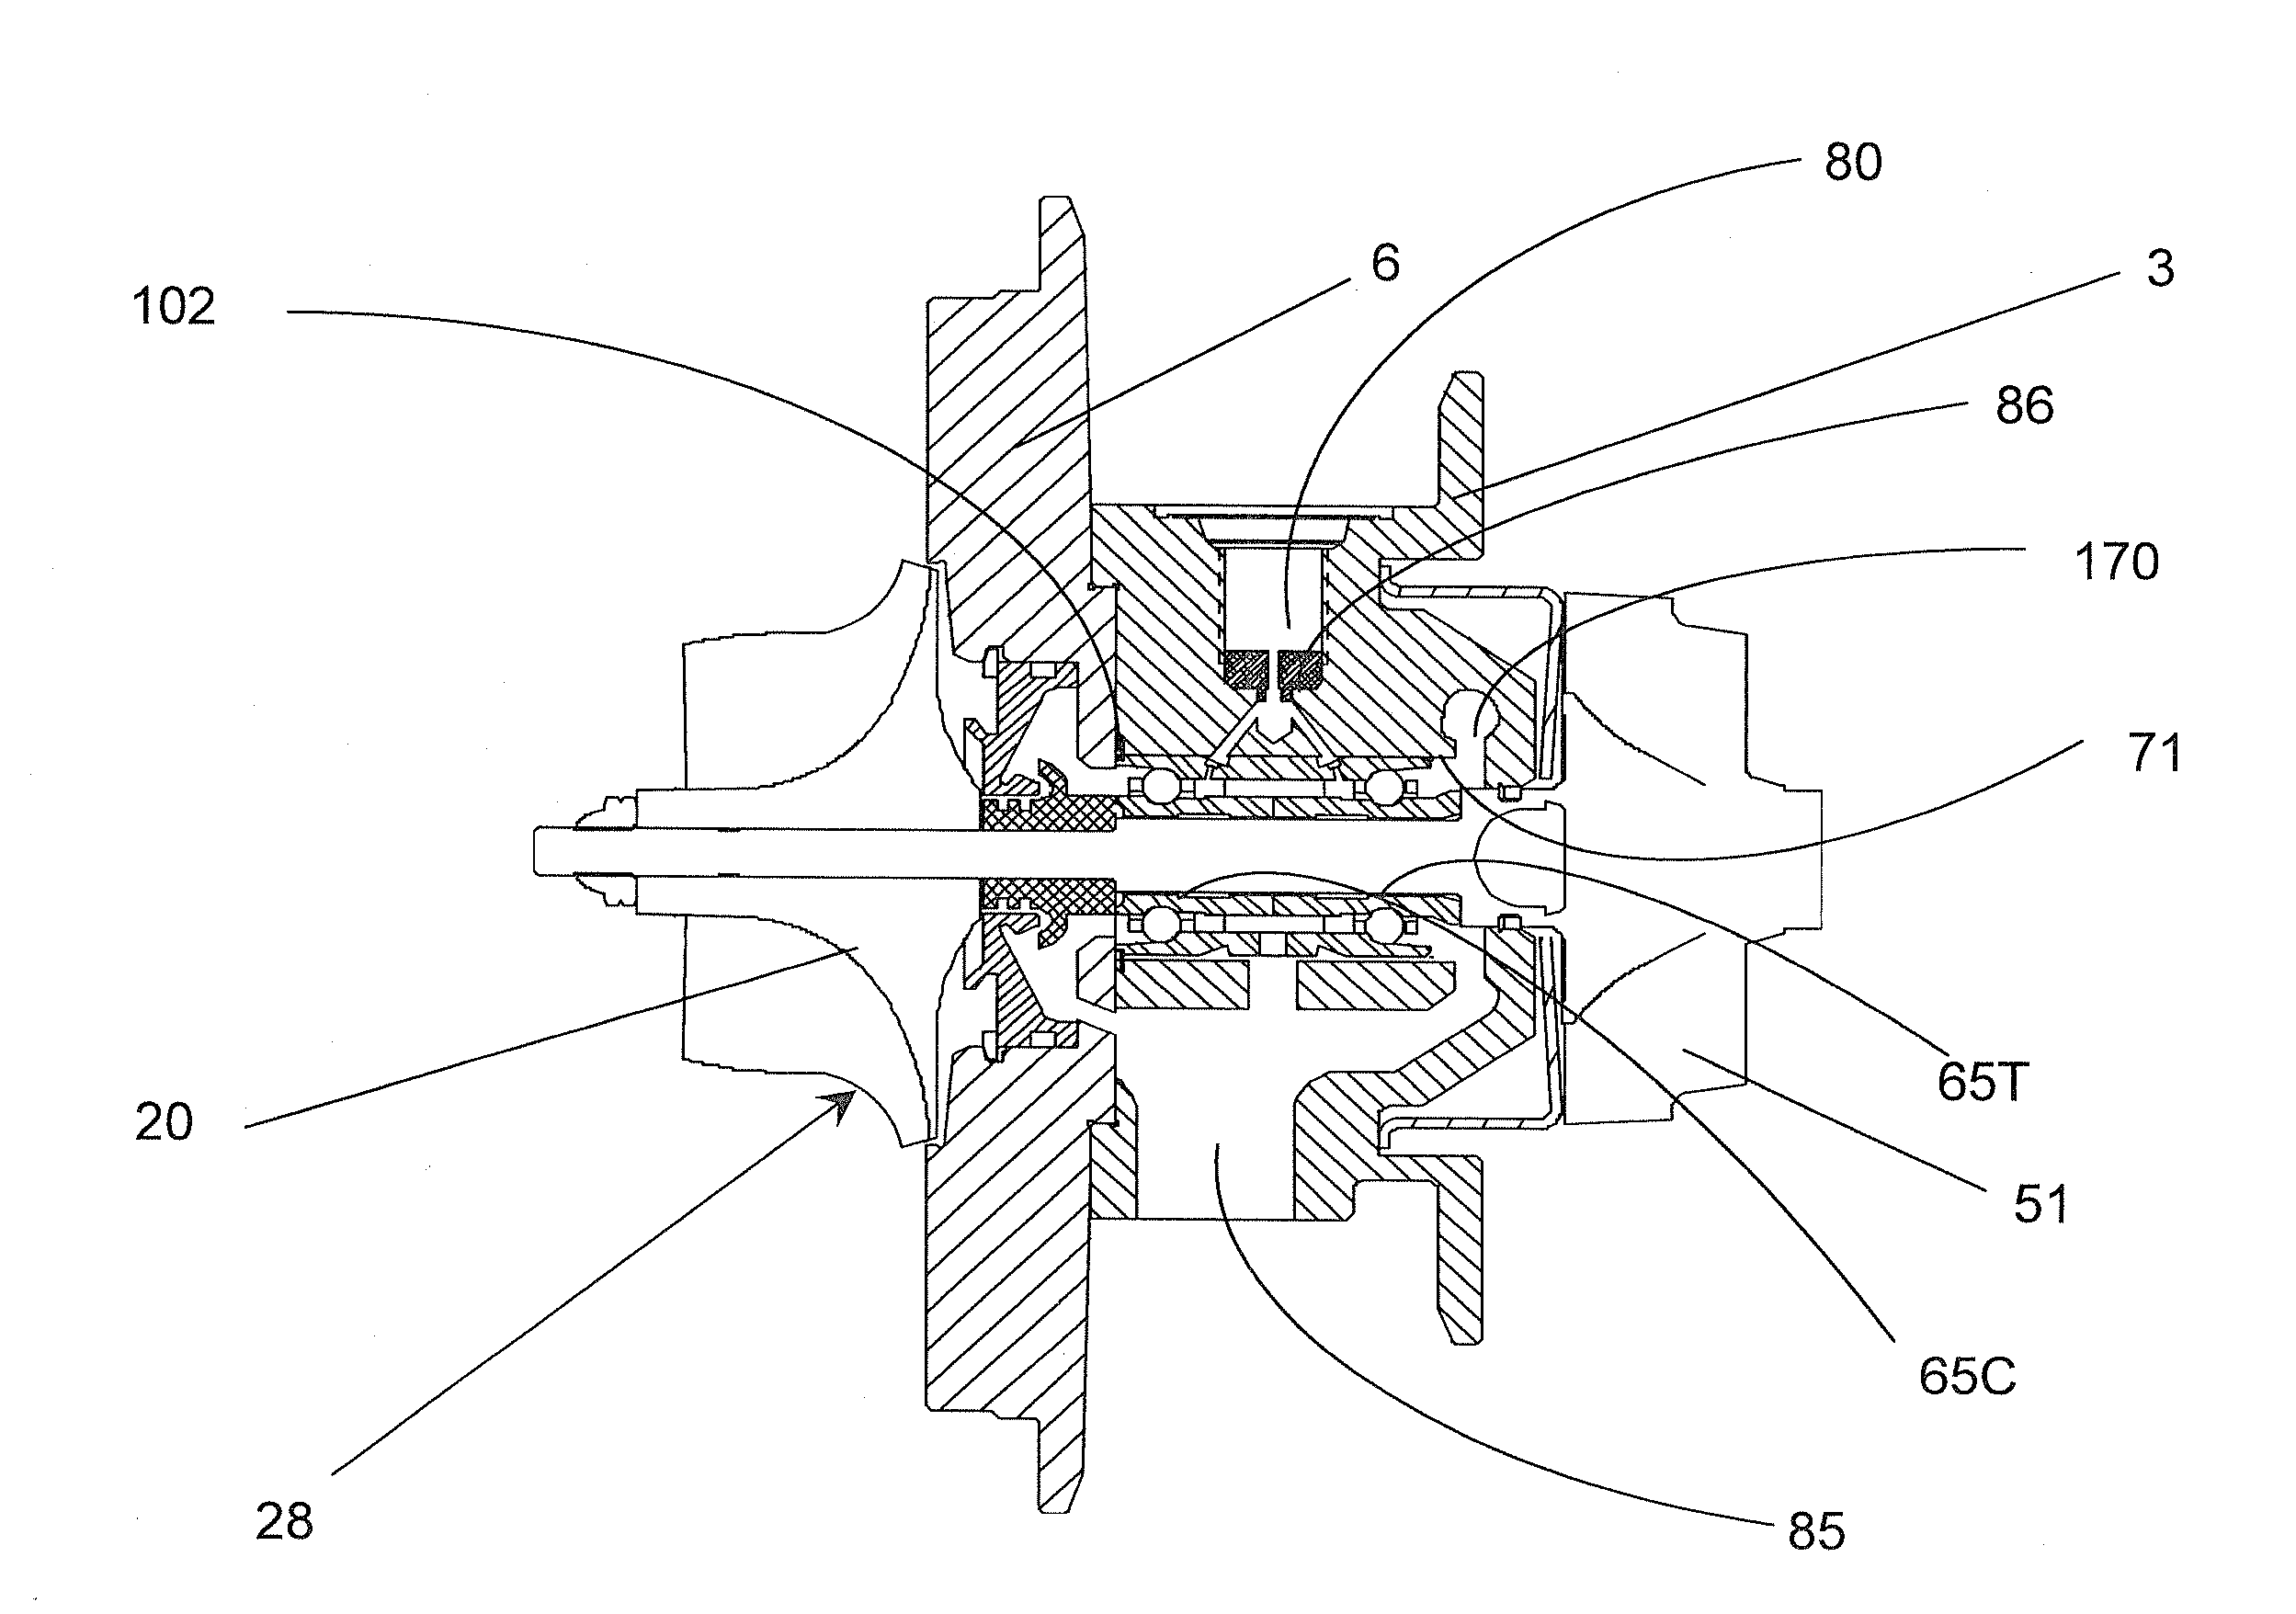 Spring clip method for Anti-rotation and thrust constraint of a rolling element bearing cartridge